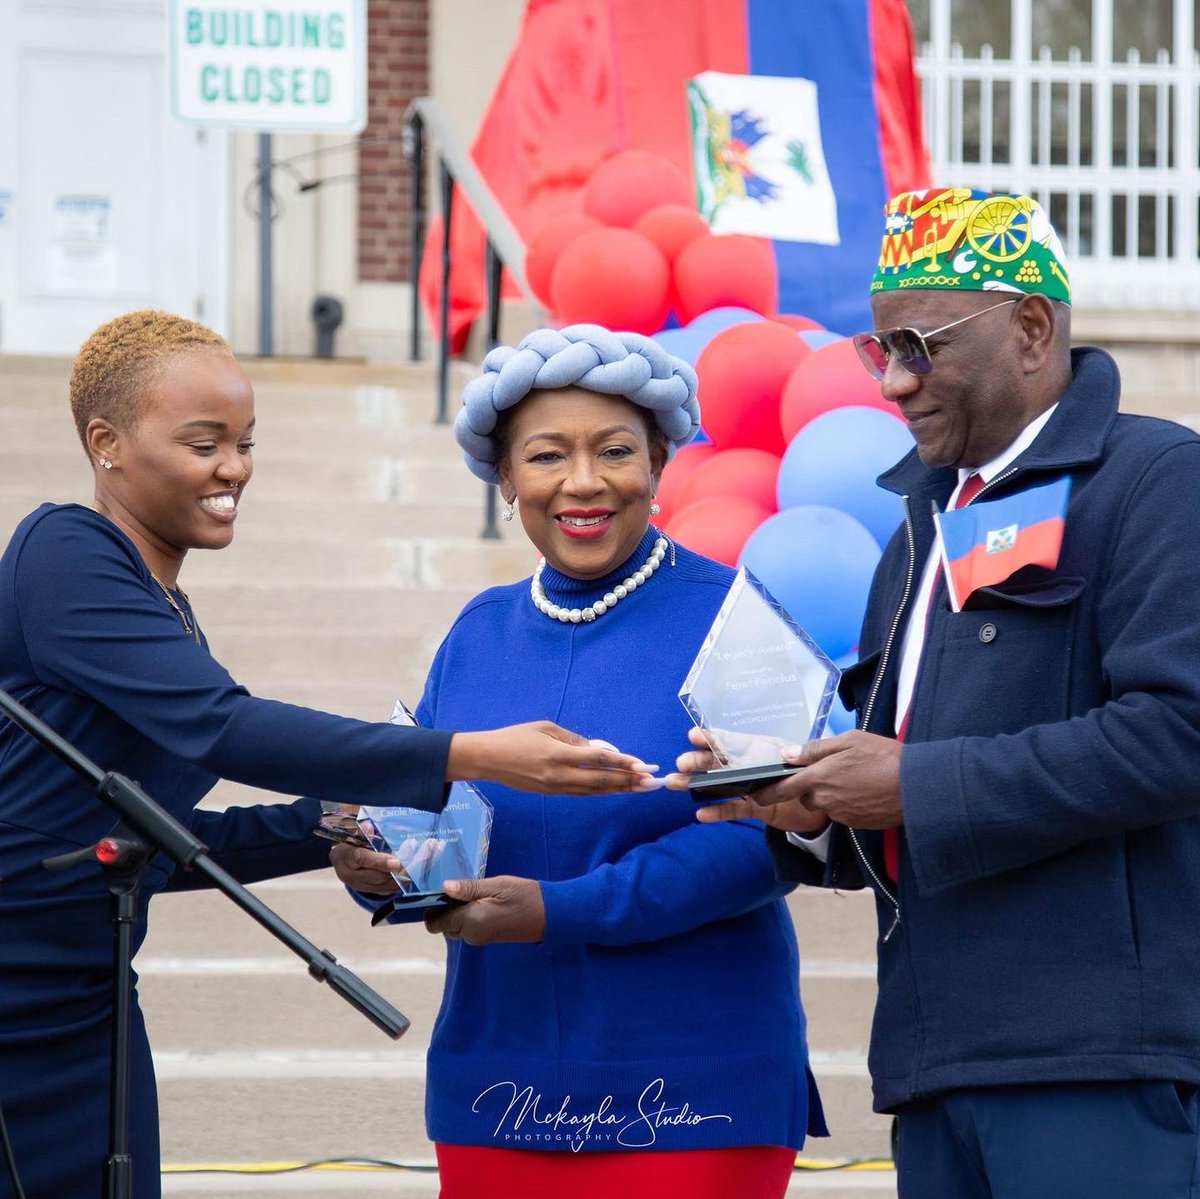 Today we gather all over the world to celebrate the 220TH ANNIVERSARY of our beloved Haitian flag 🇭🇹 & Haitian Heritage all May!

Event: HFDPCNJ Haitian Heritage Month Kickoff Flag Raising Ceremony in Elizabeth on May 1st.
#Haiti #Haitian #HaitianHeritageMonth #HaitianFlagDay #NJ